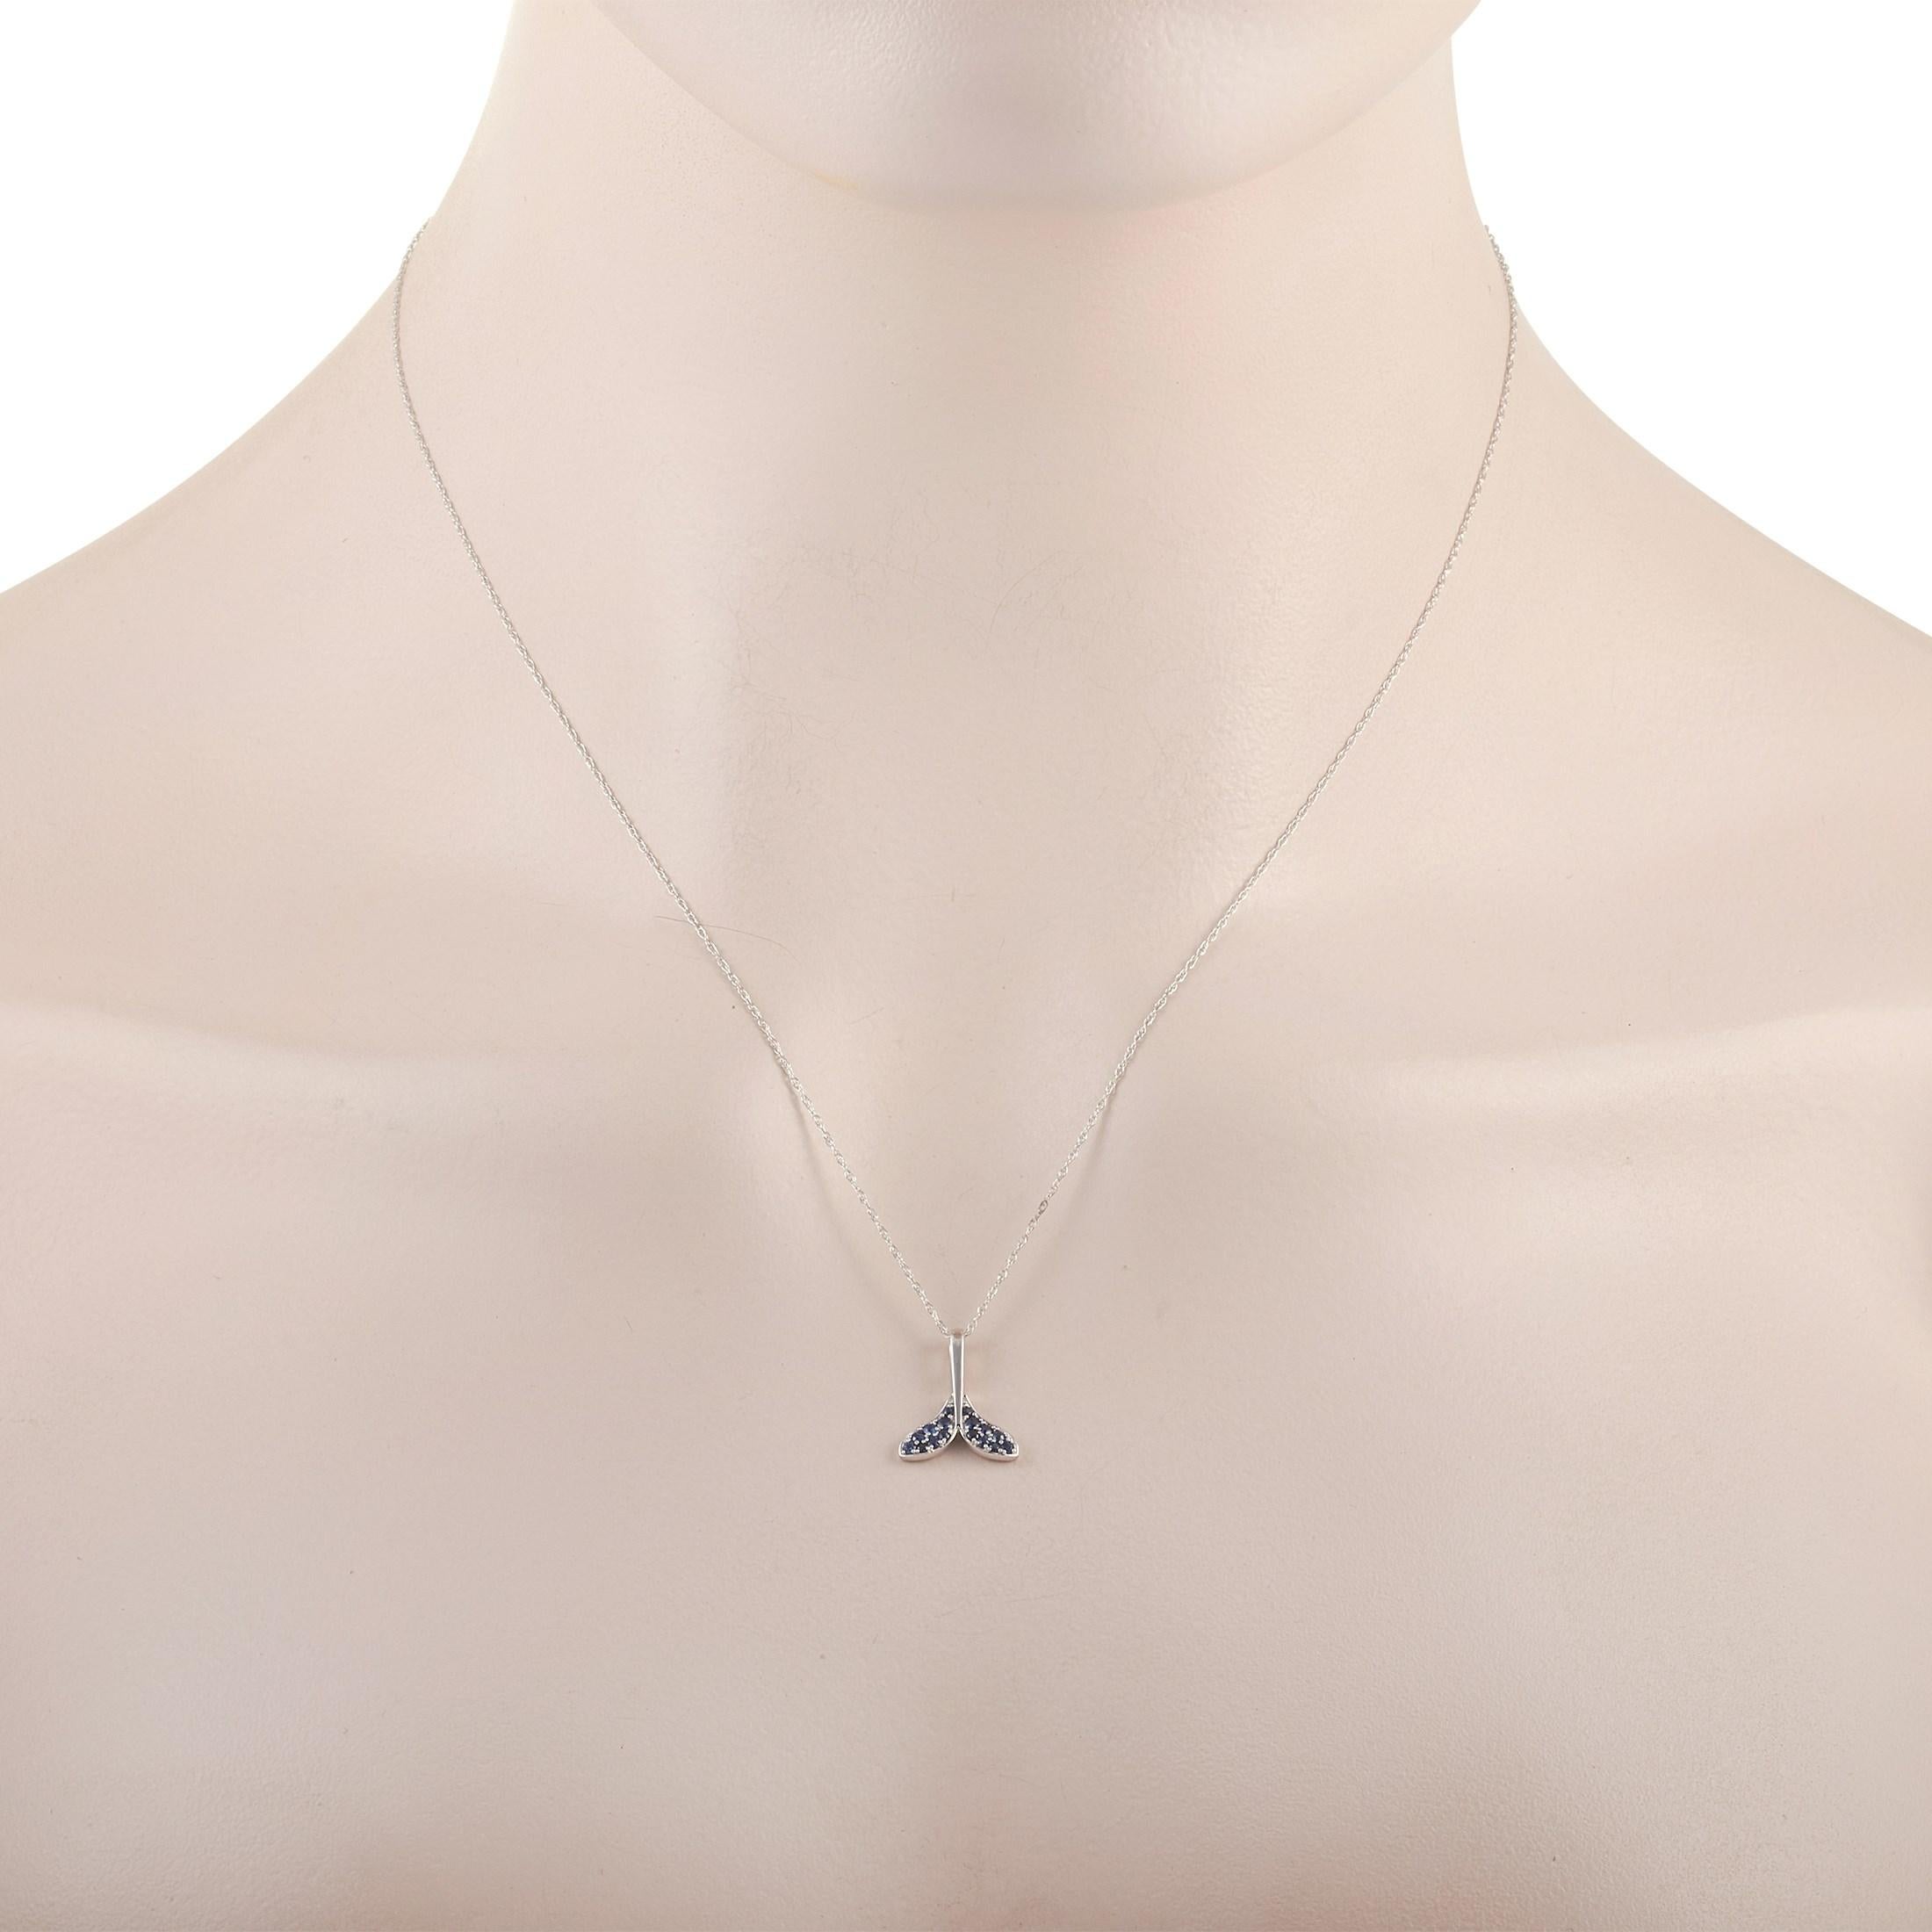 The LB Exclusive 14K White Gold 0.19 ct Sapphire Pendant Necklace features a delicate 14K White Gold chain that is 17 inches in length and includes a matching 14K White gold pendant in the shape of a mermaids tail set with 0.19 carats of round cut